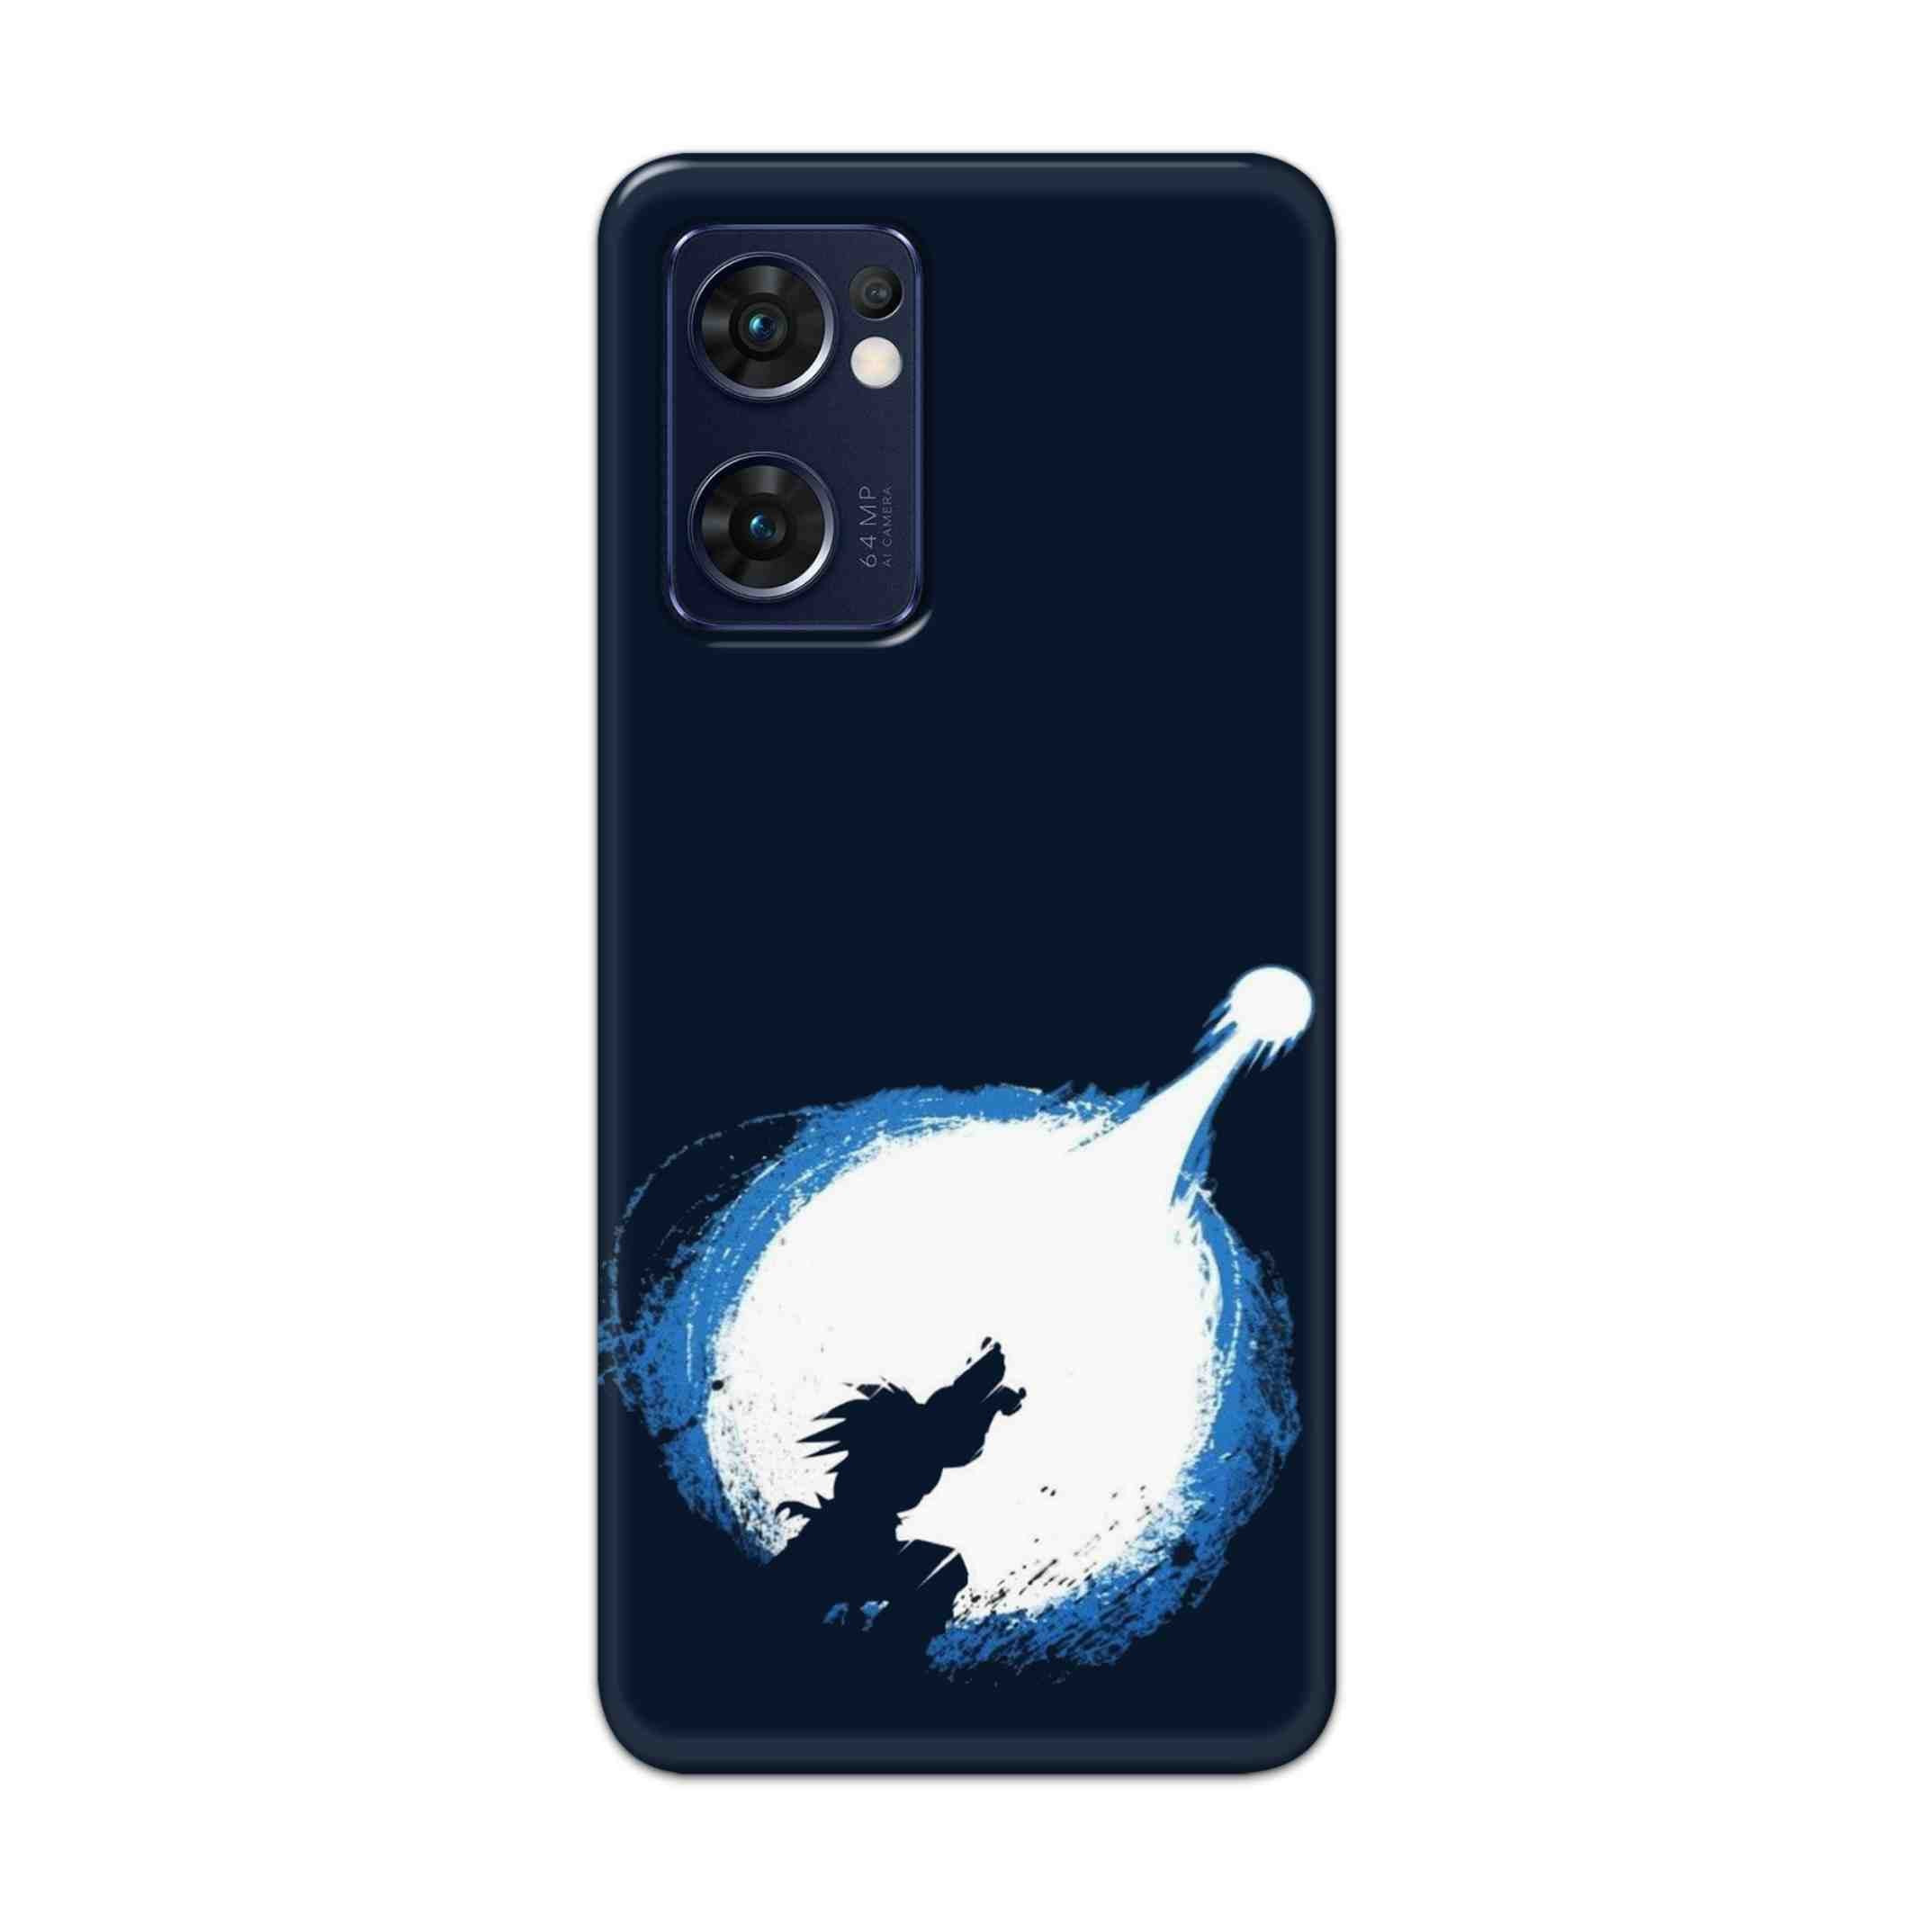 Buy Goku Power Hard Back Mobile Phone Case Cover For Reno 7 5G Online